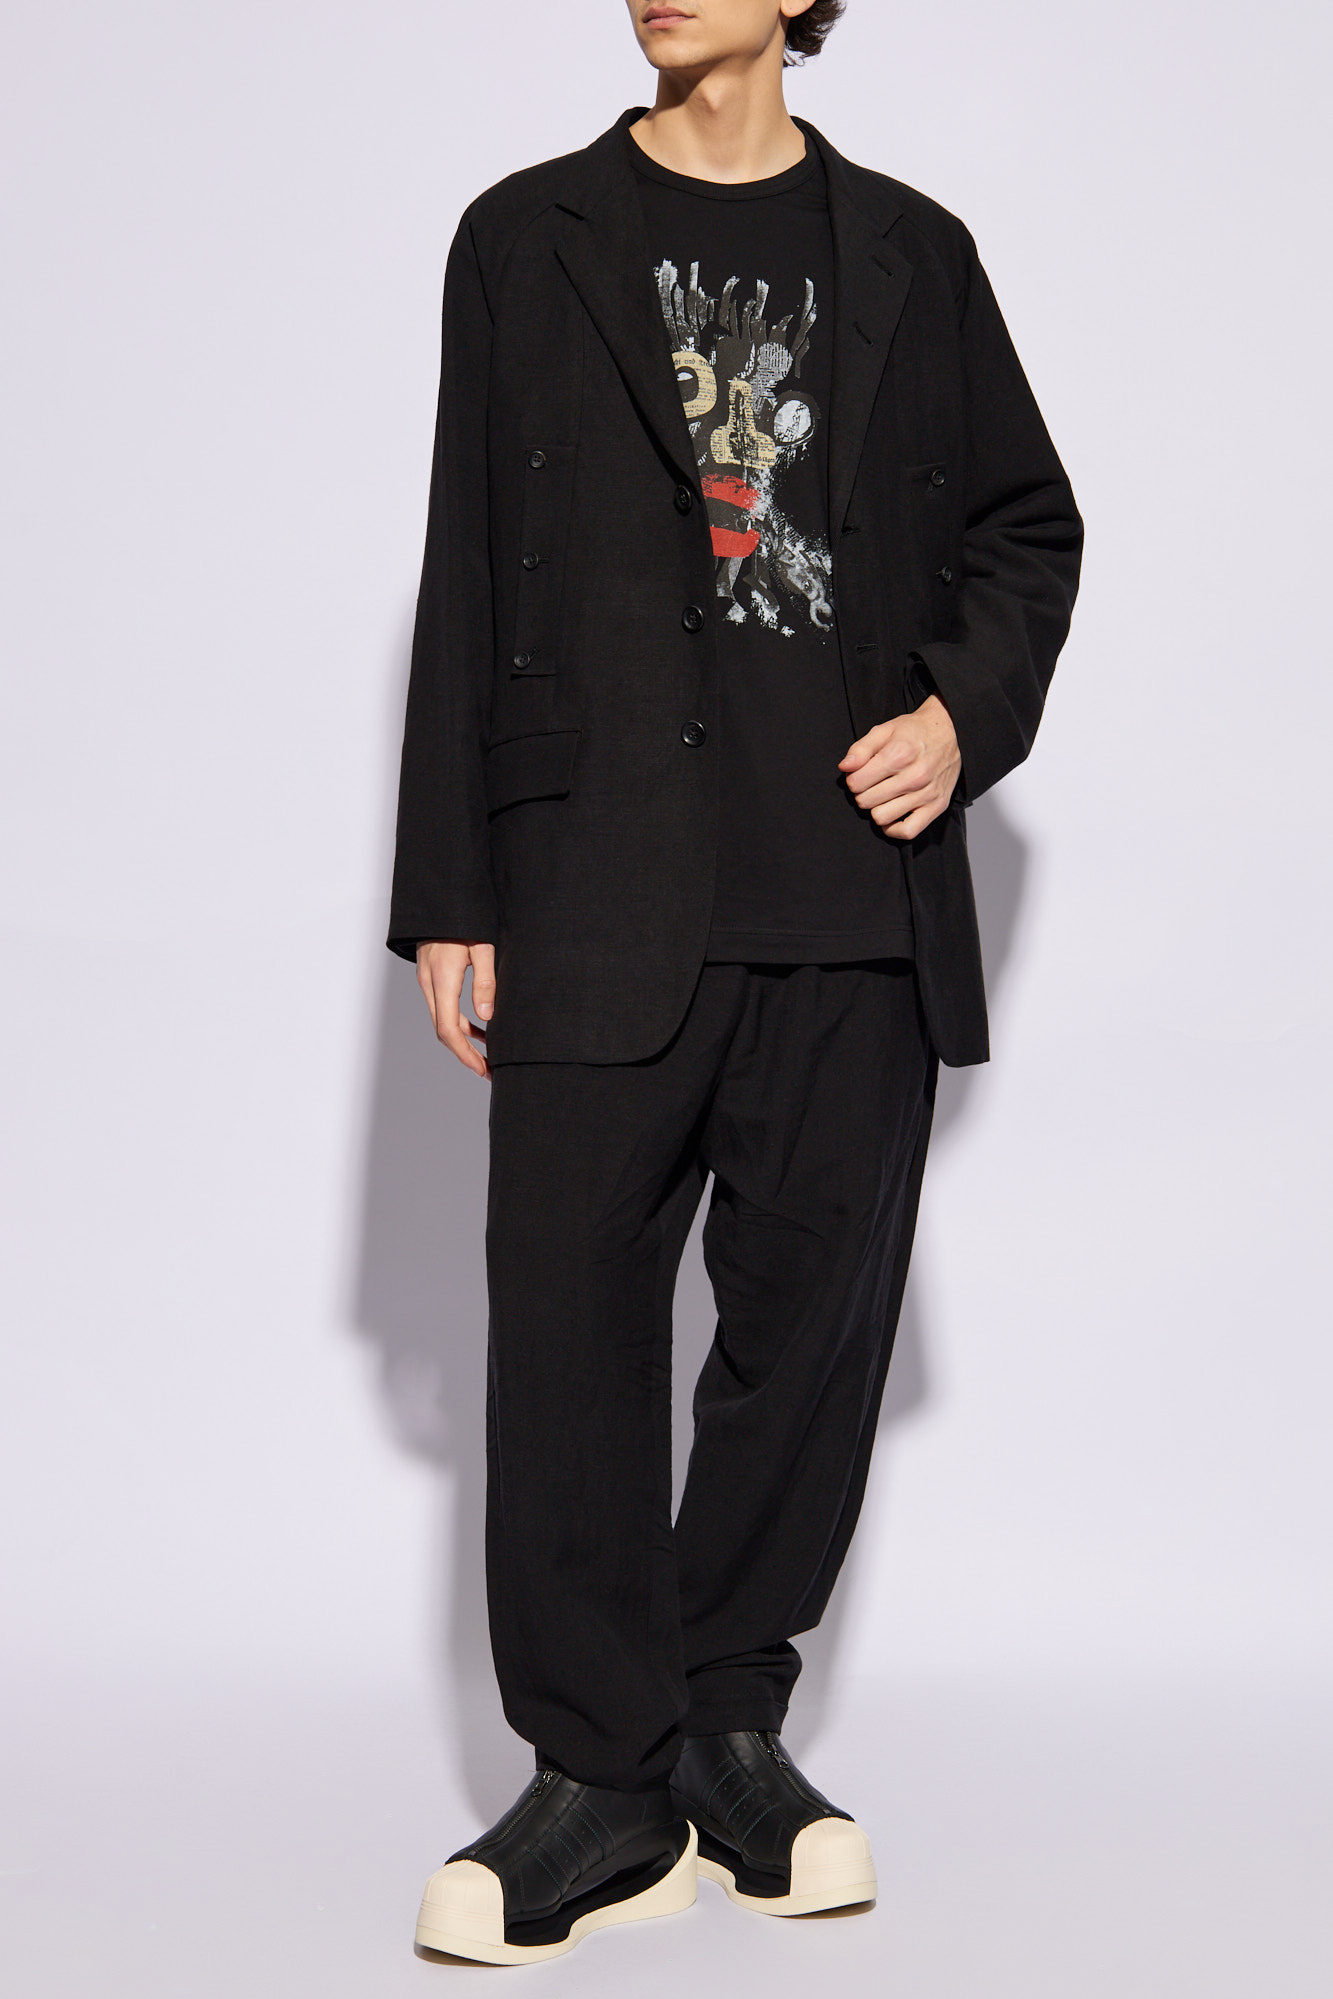 Yohji Yamamoto trousers sabelle with tapered legs